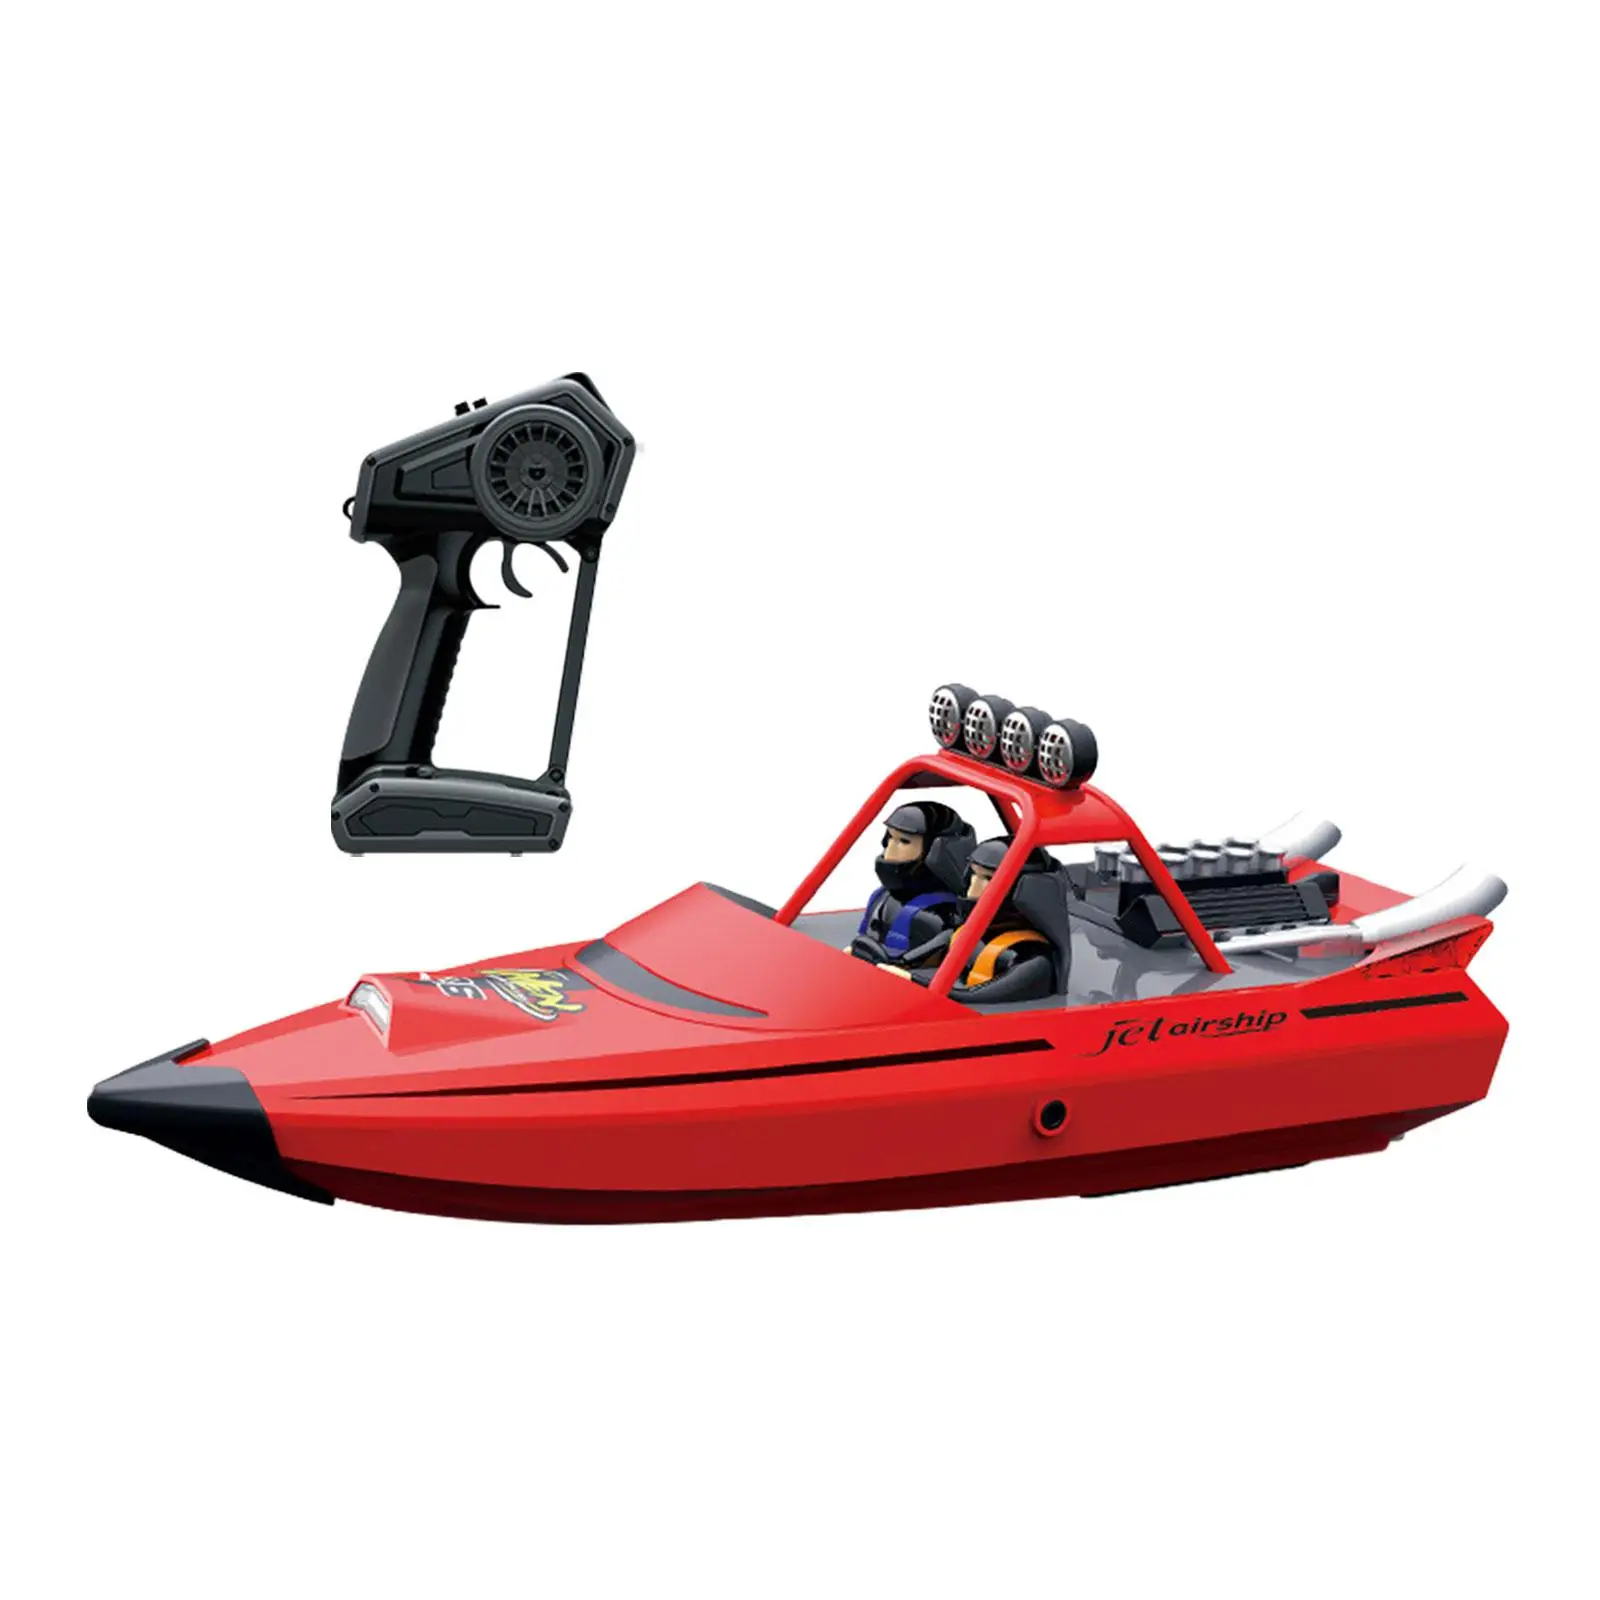 RC Boat Summer Outdoor Water Toy Remote Control Boat 30km/H High Speed for Kids Teens Adults River Water Play Holiday Gifts